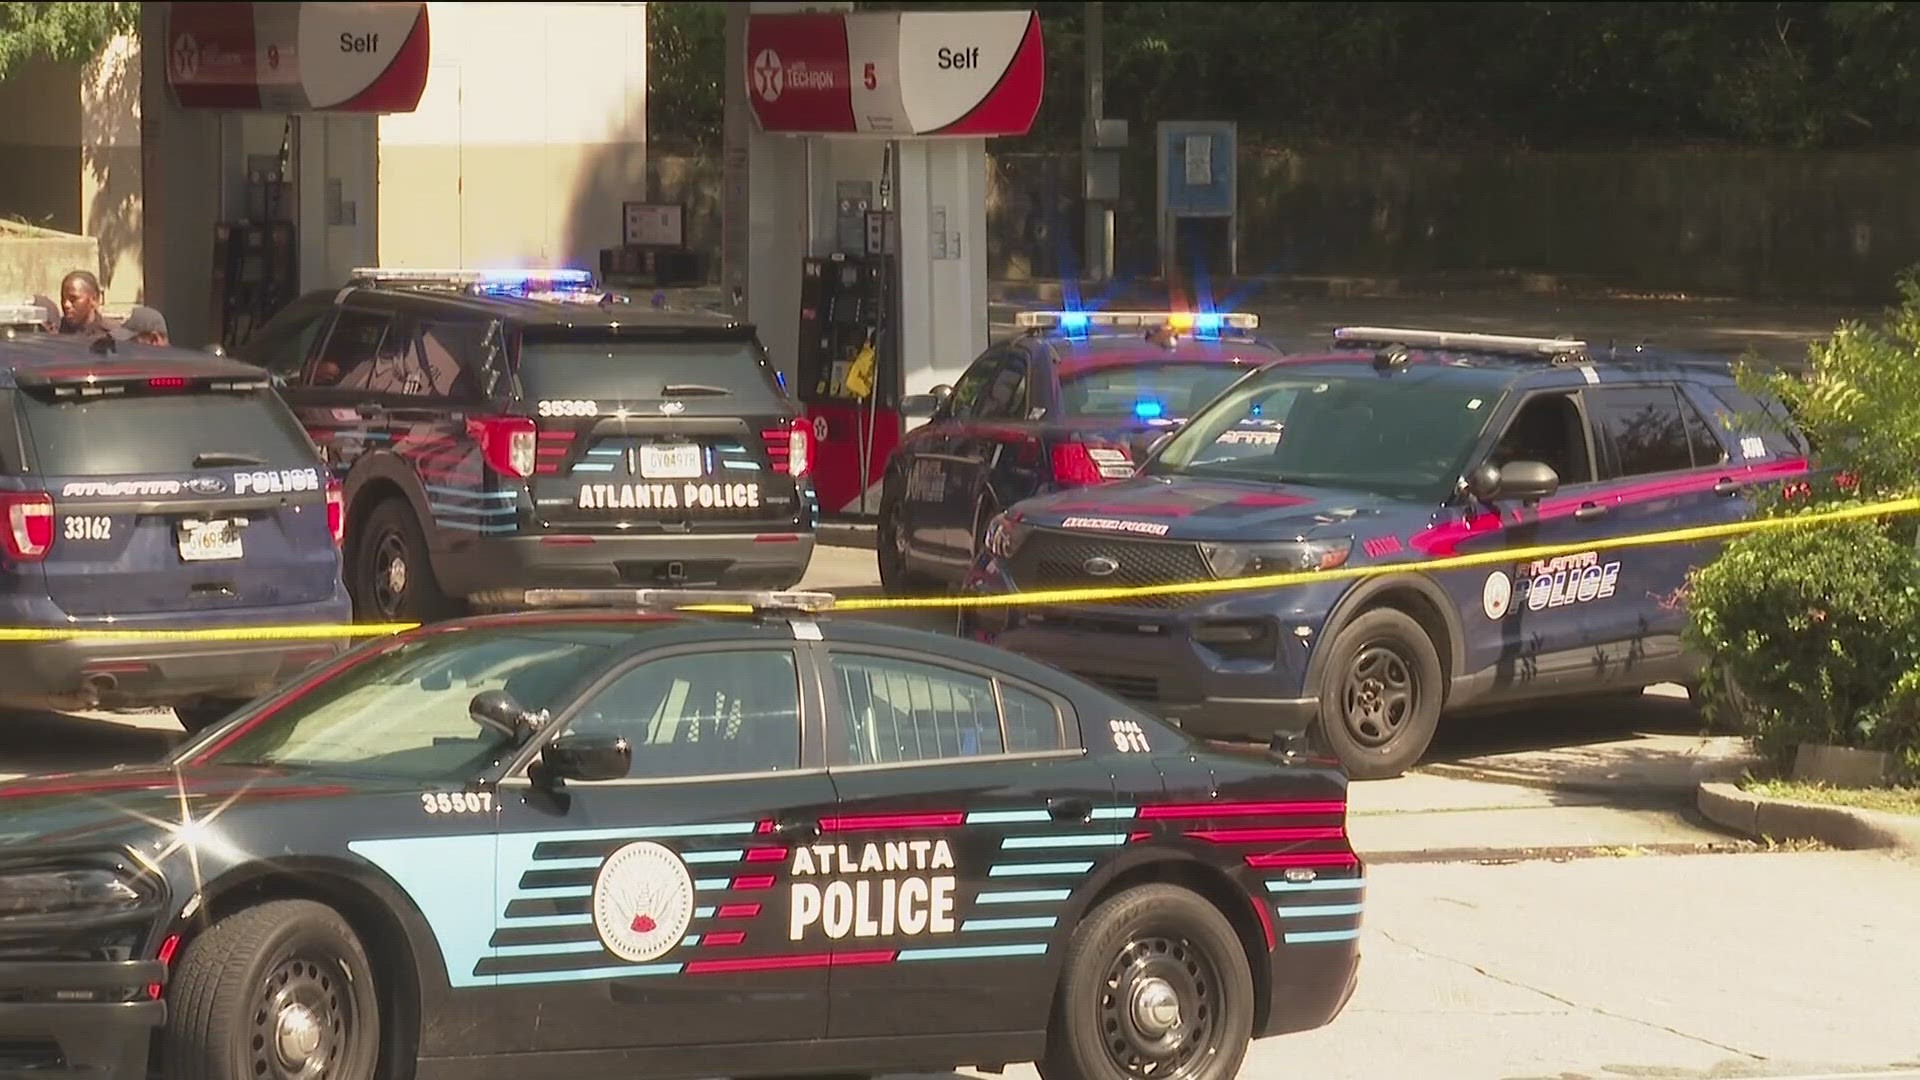 Just after 2 p.m., Atlanta Police said they responded to 101 Hamilton E. Holmes Drive NW, the location of a Texaco gas station.